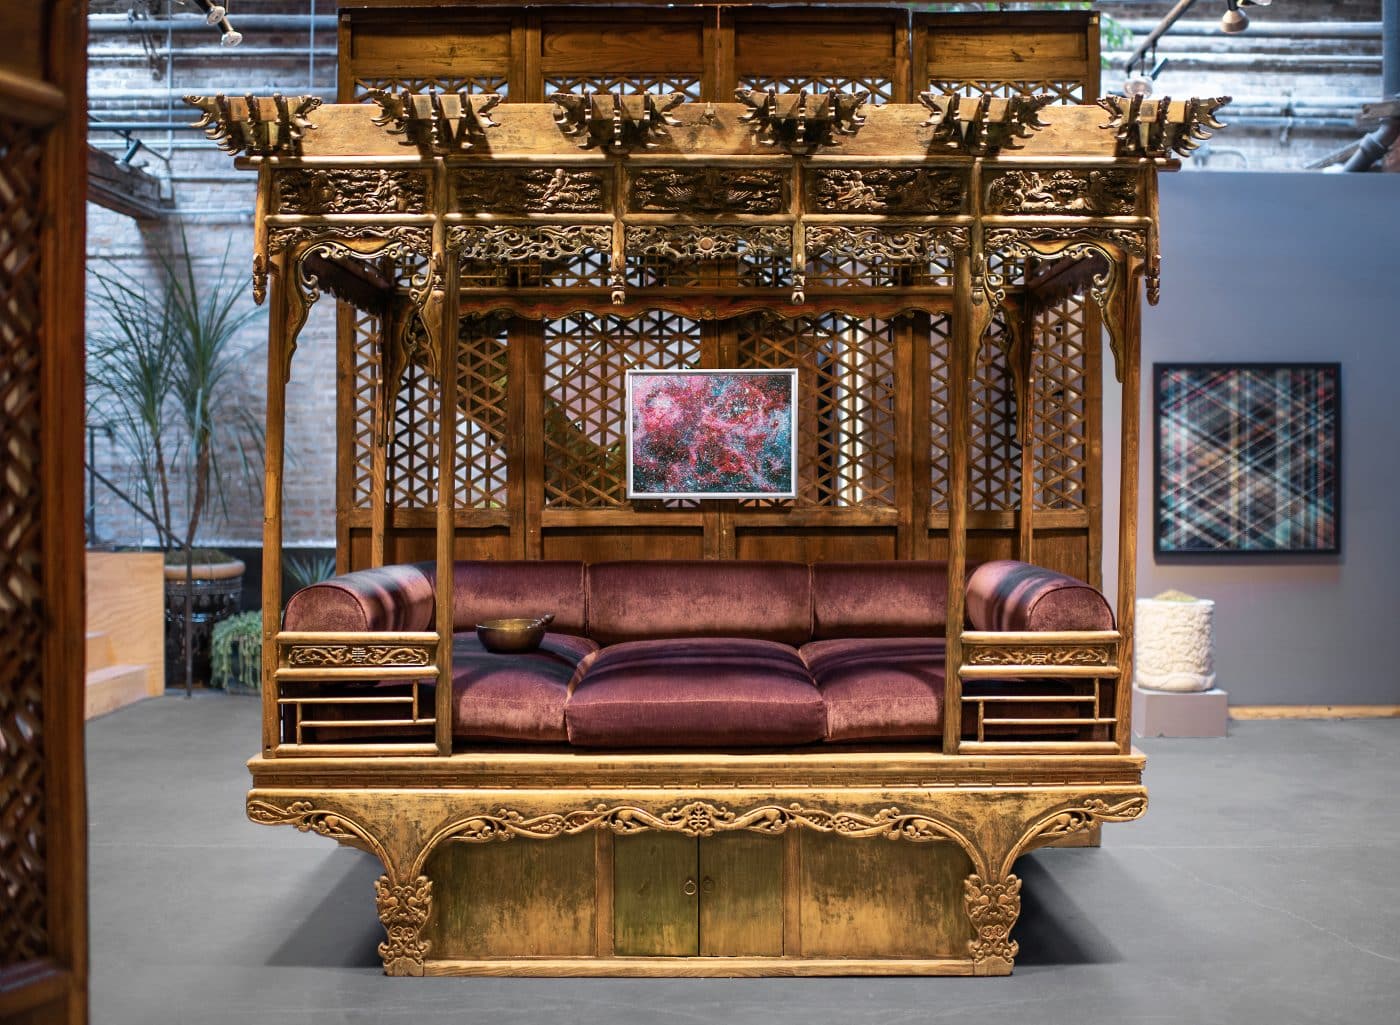 Ornate Chinese canopy bed